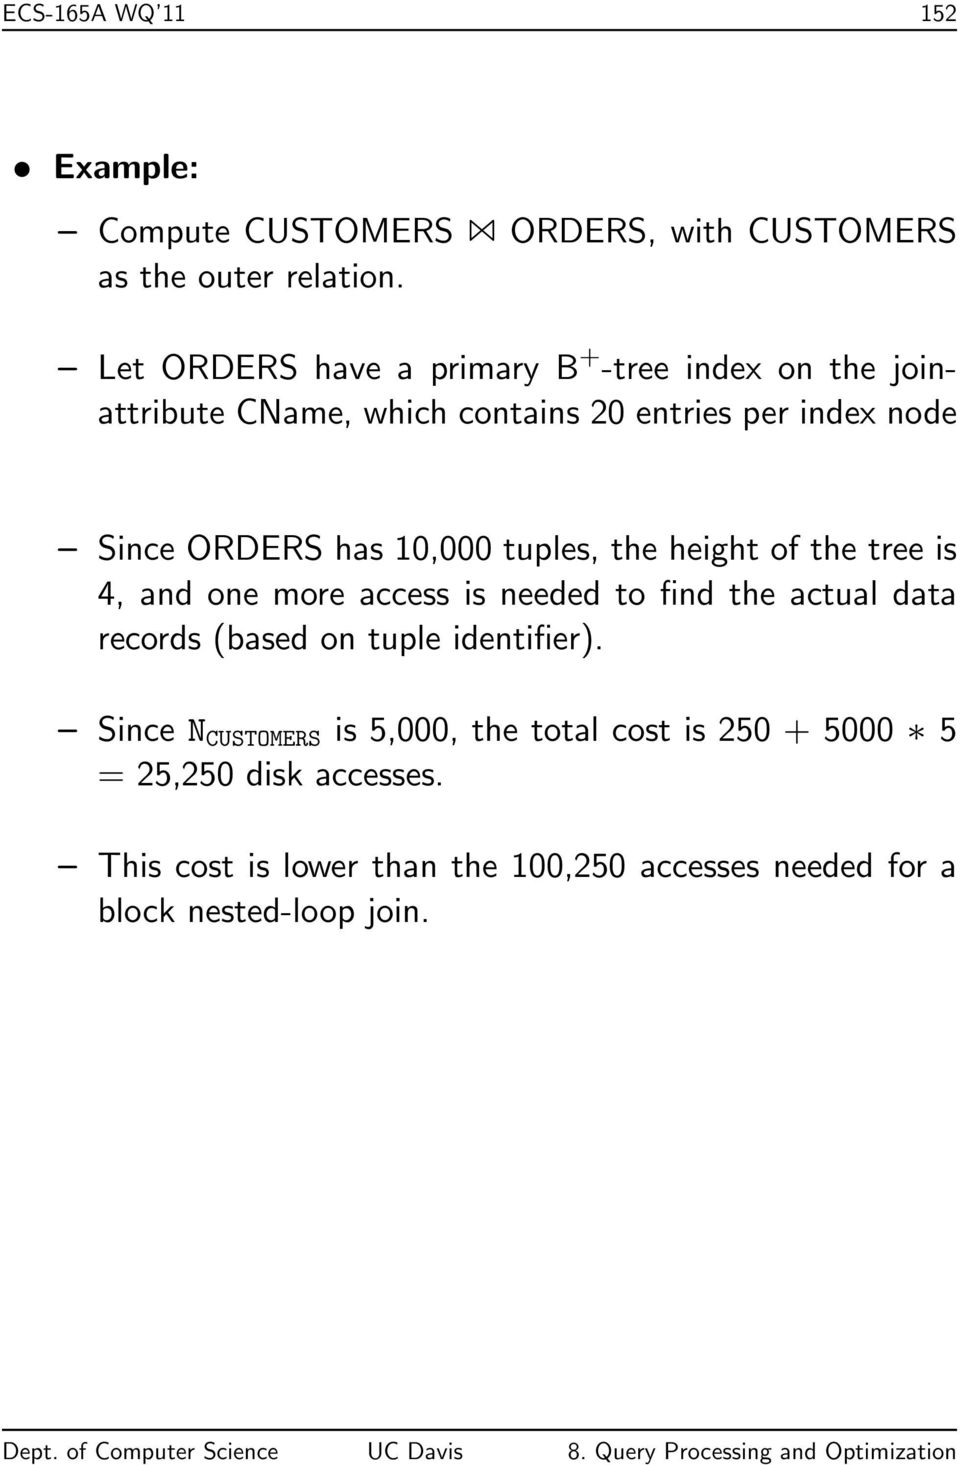 10,000 tuples, the height of the tree is 4, and one more access is needed to find the actual data records (based on tuple